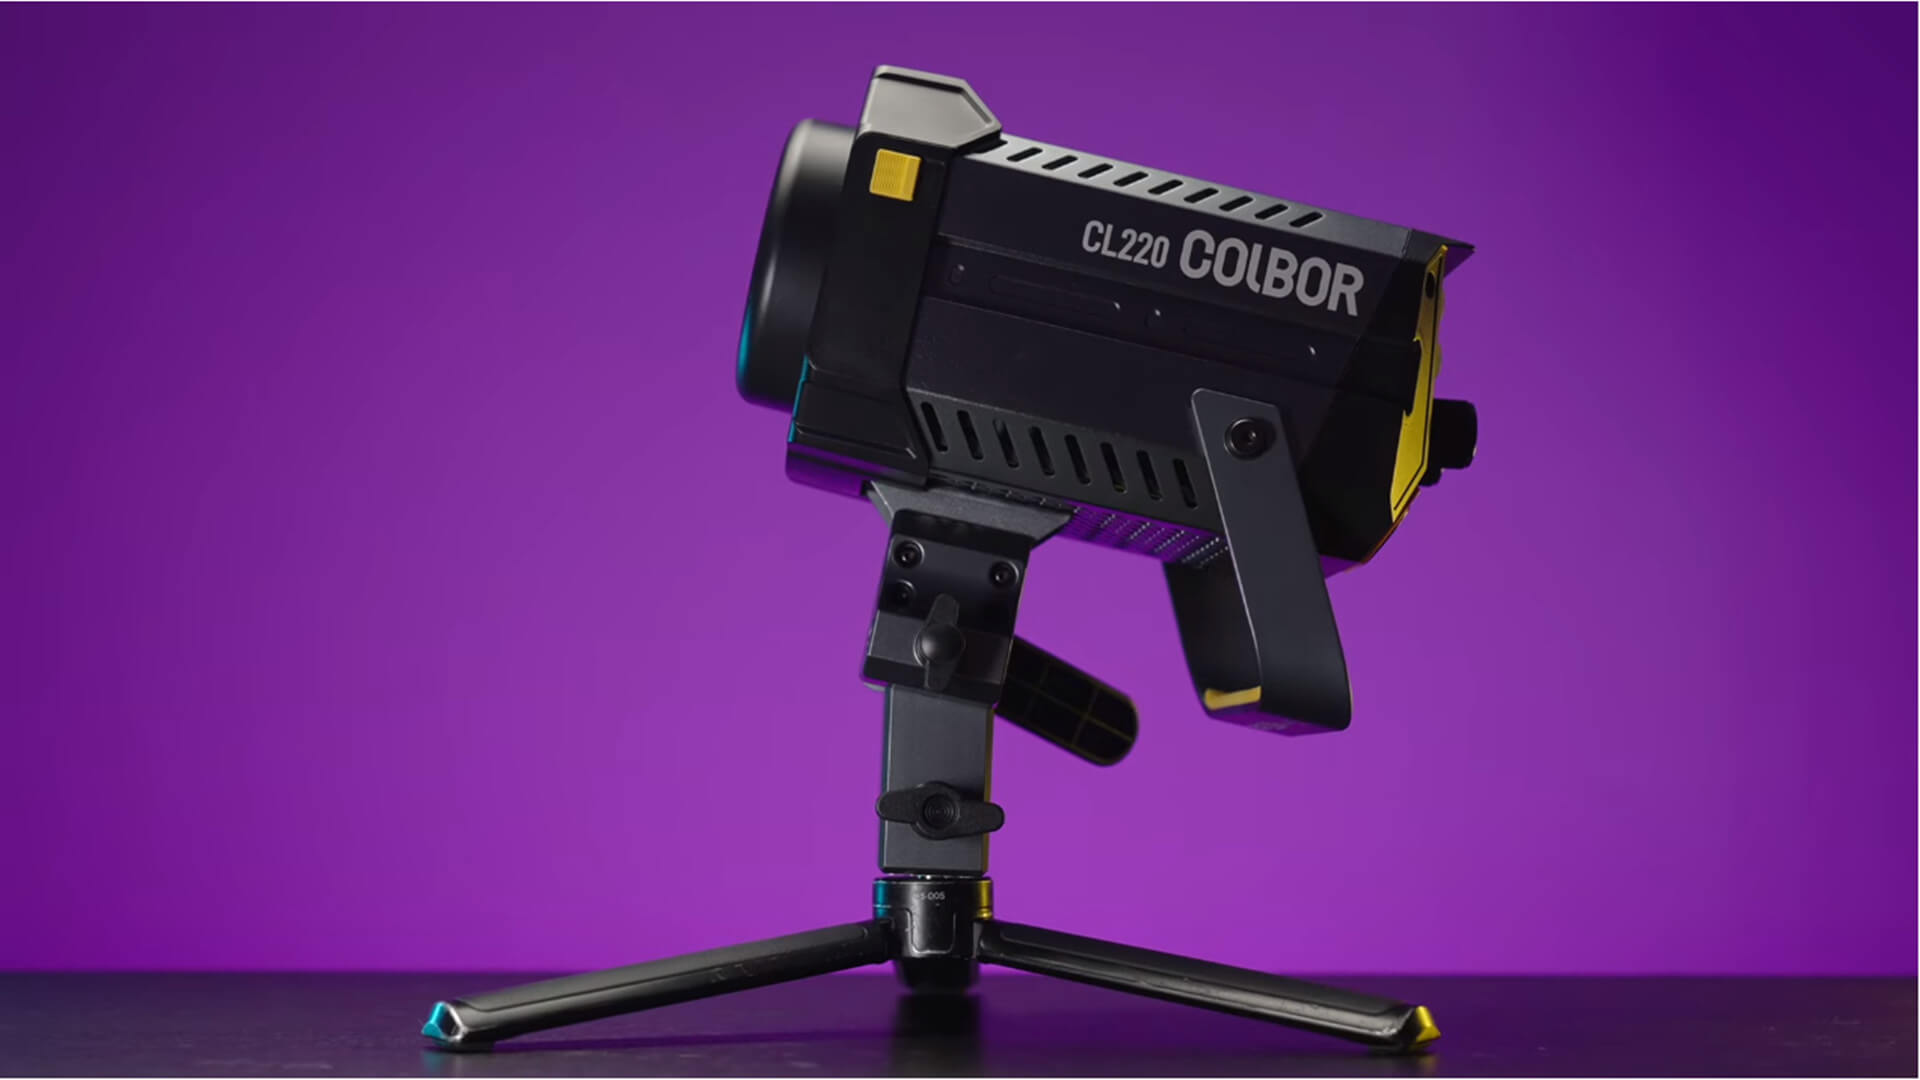 Product review: COLBOR CL220 video continuous light